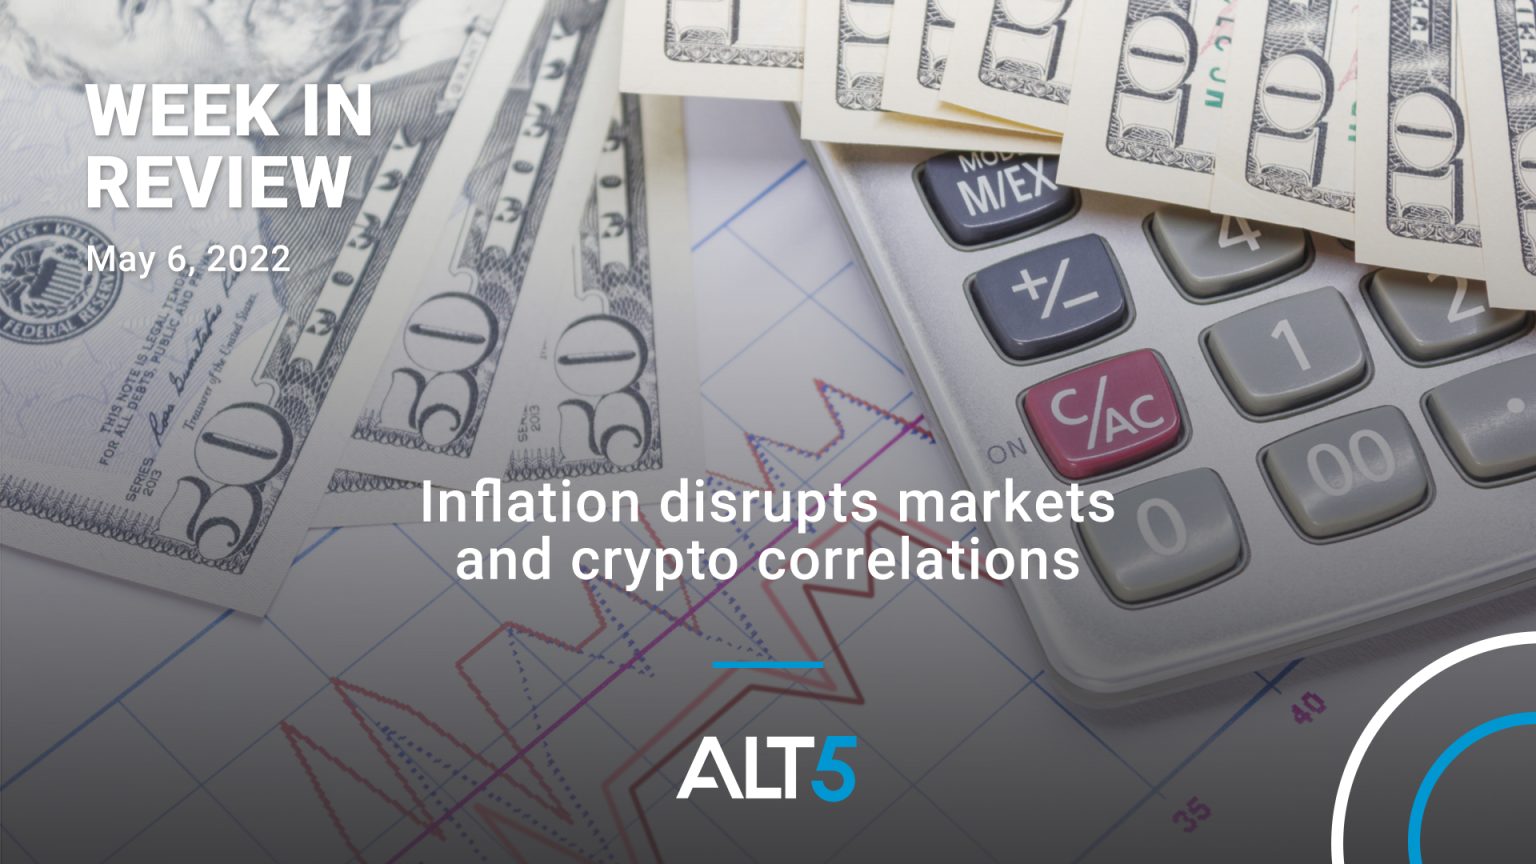 Week in review: May 6 2022 Inflation disrupts markets and crypto correlations